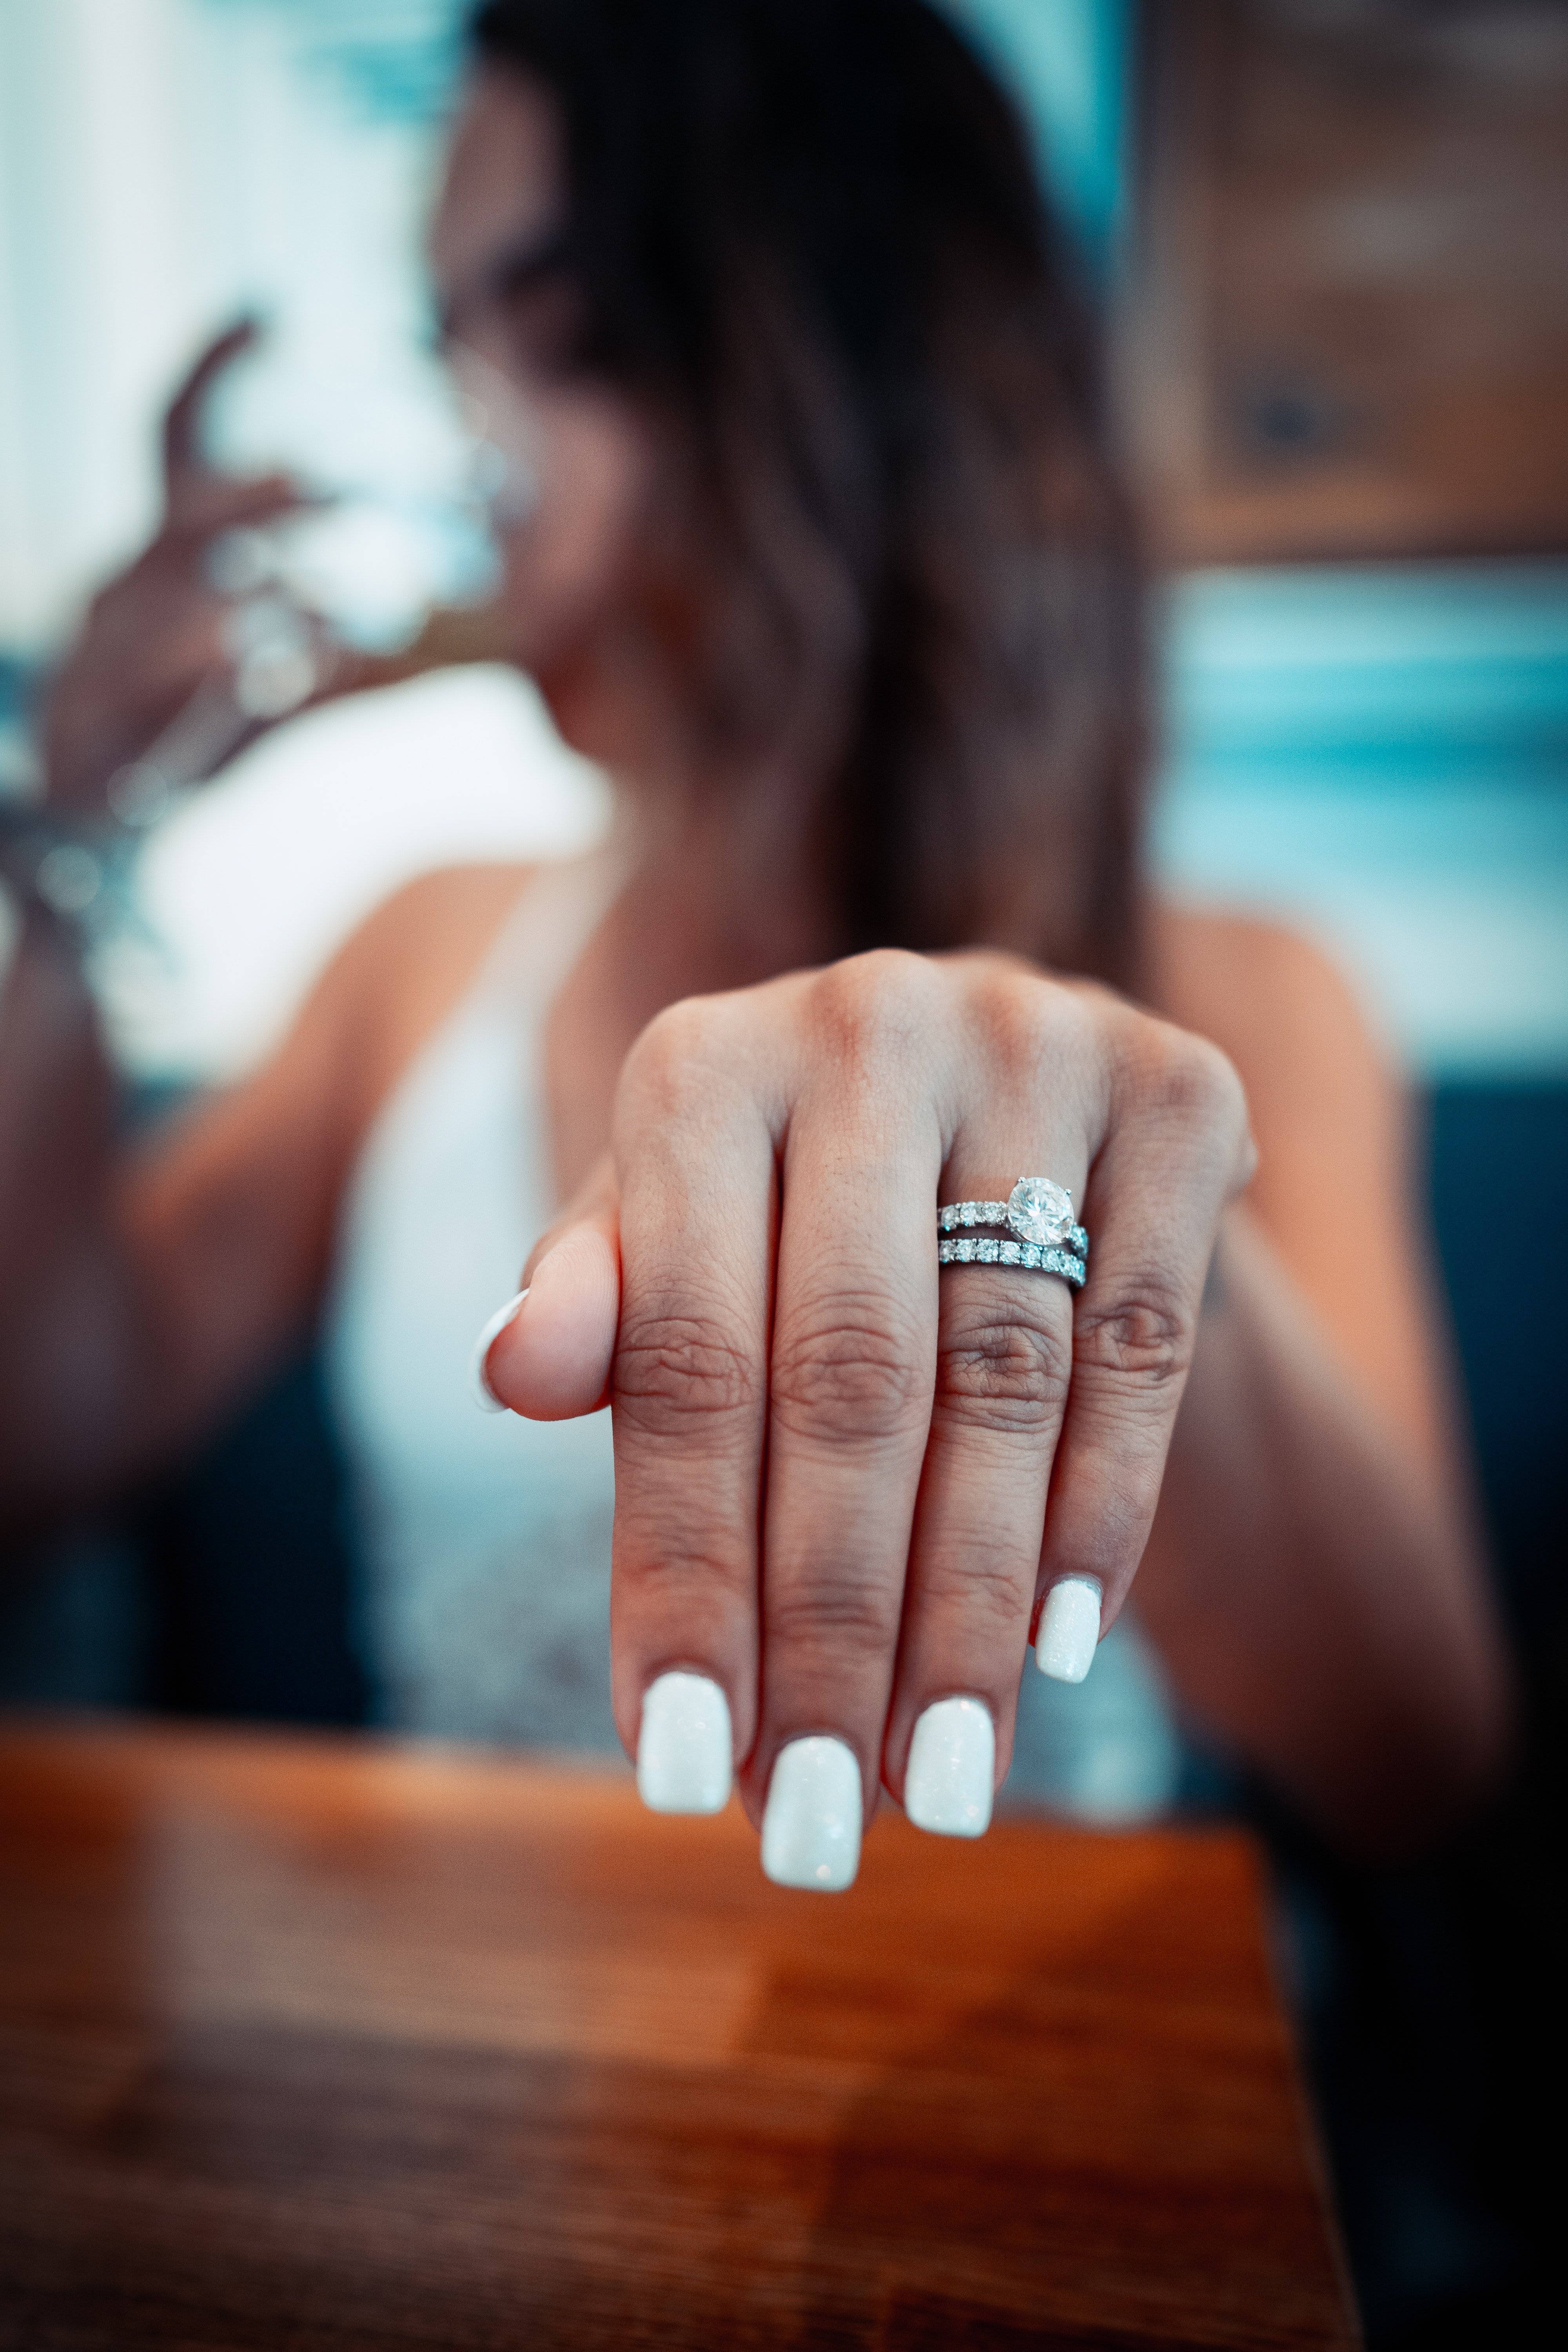 Olivia proudly showed her engagement ring to Lucas | Photo: Pexels